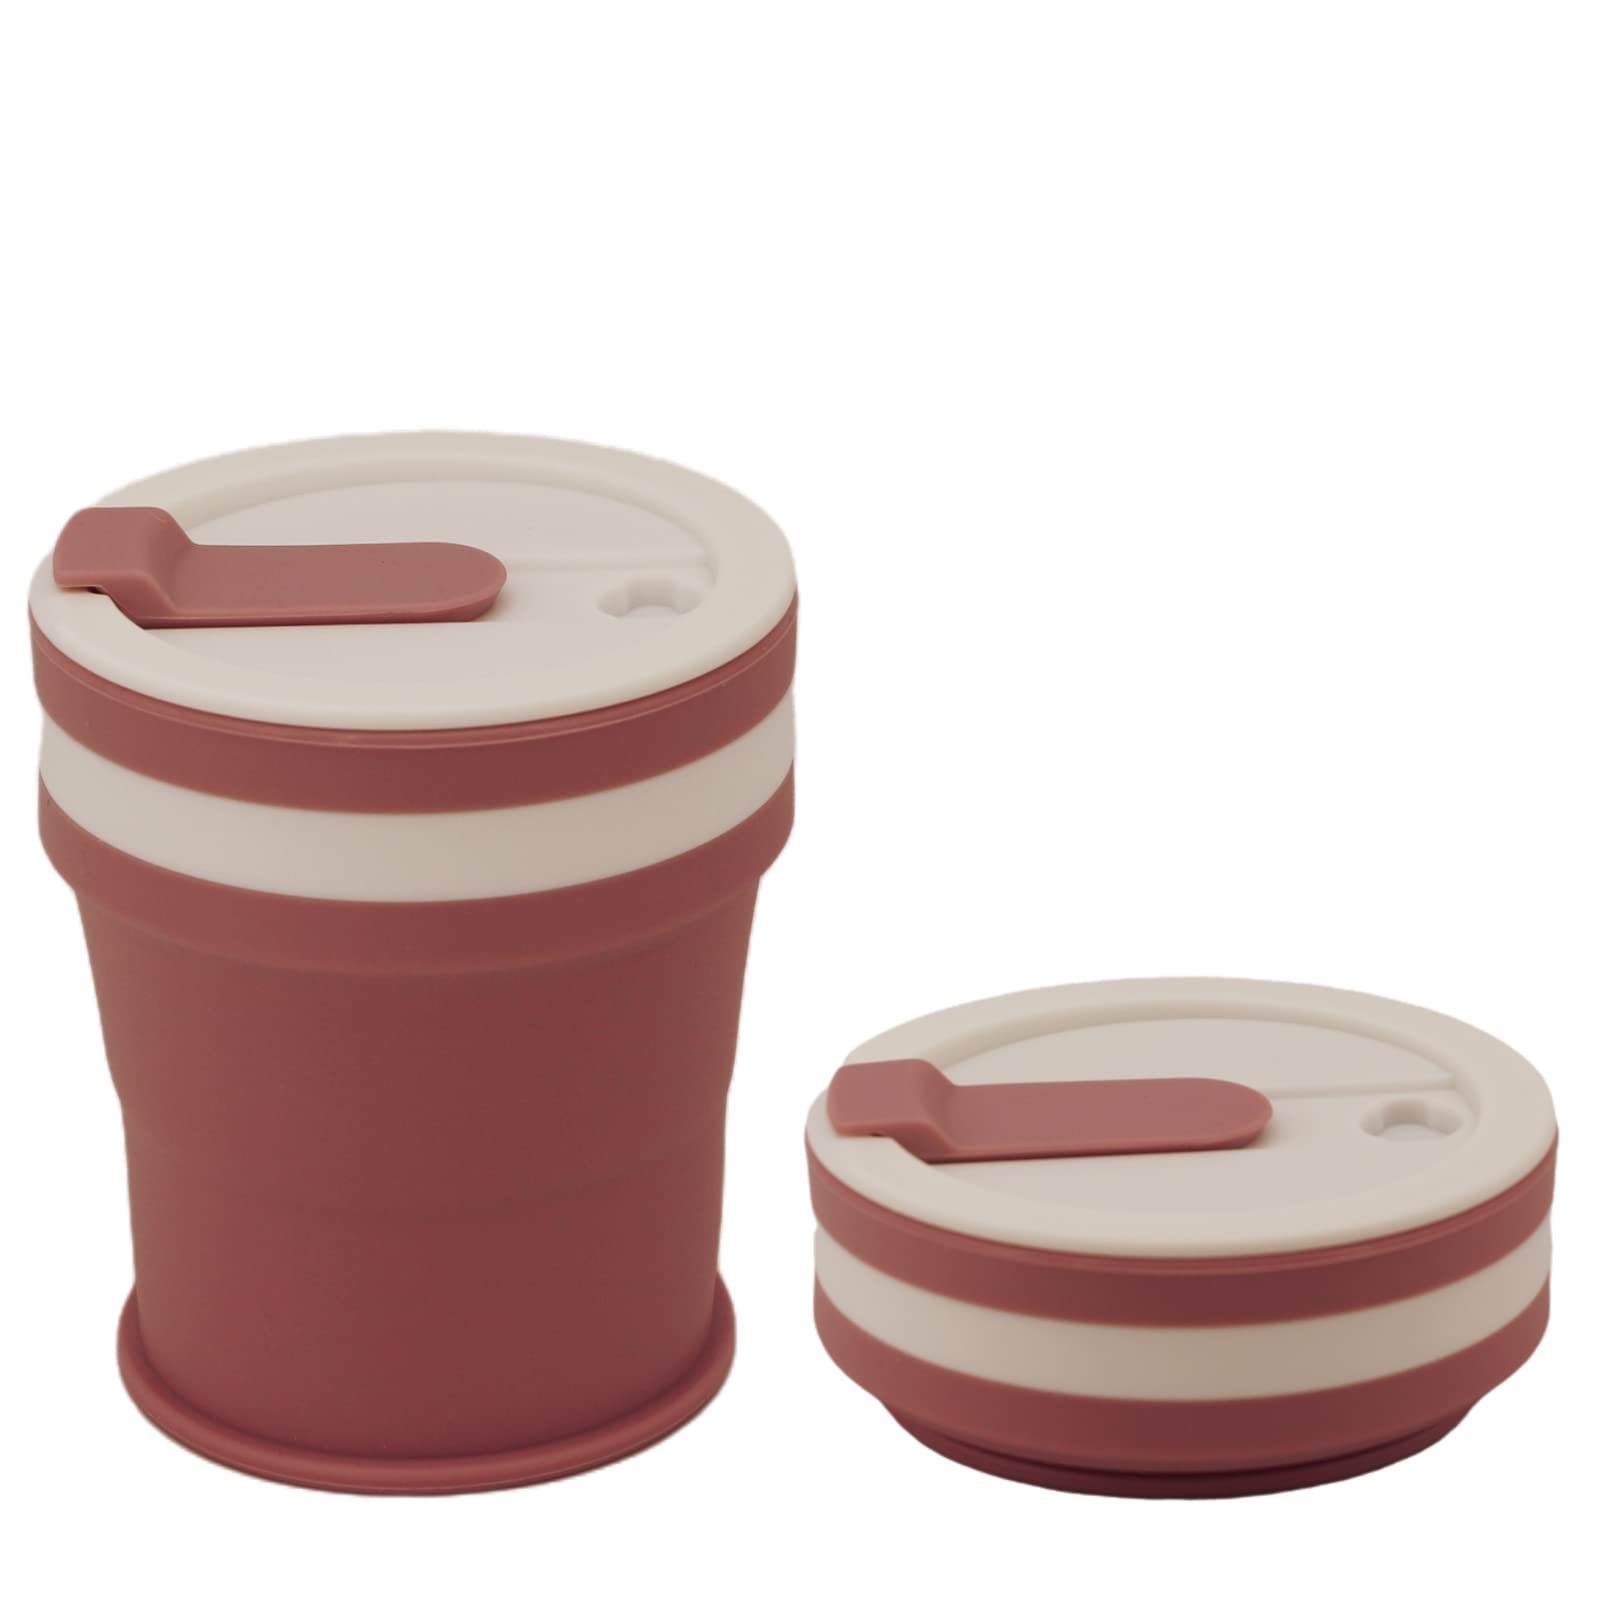 Full Color Custom Silicone Collapsible Travel Coffee Cup - 12 oz.